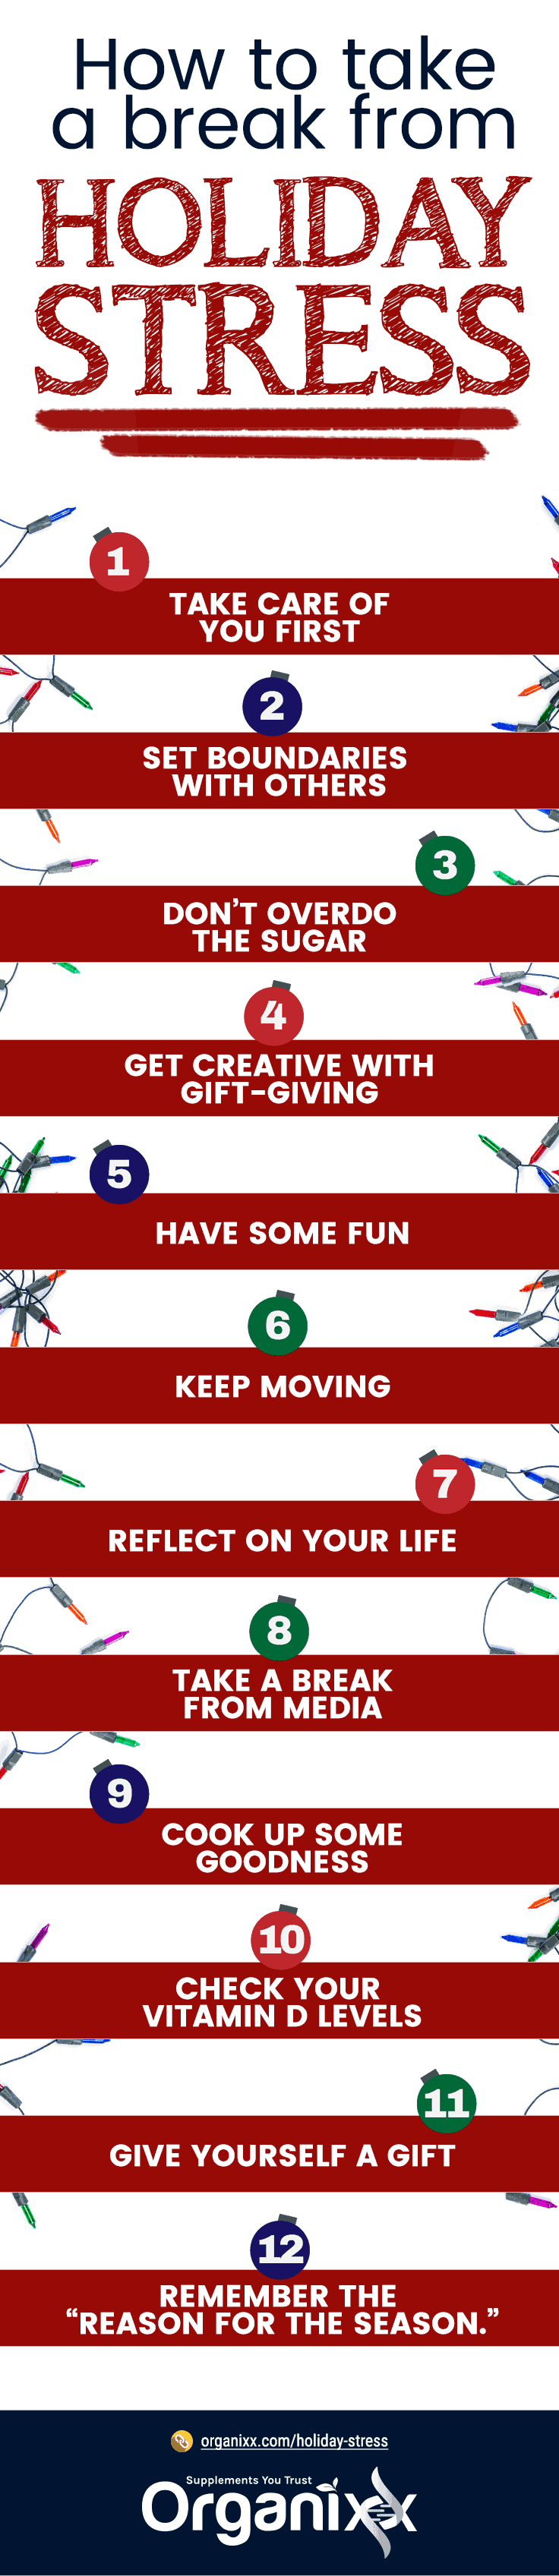 Holiday Stress Infographic